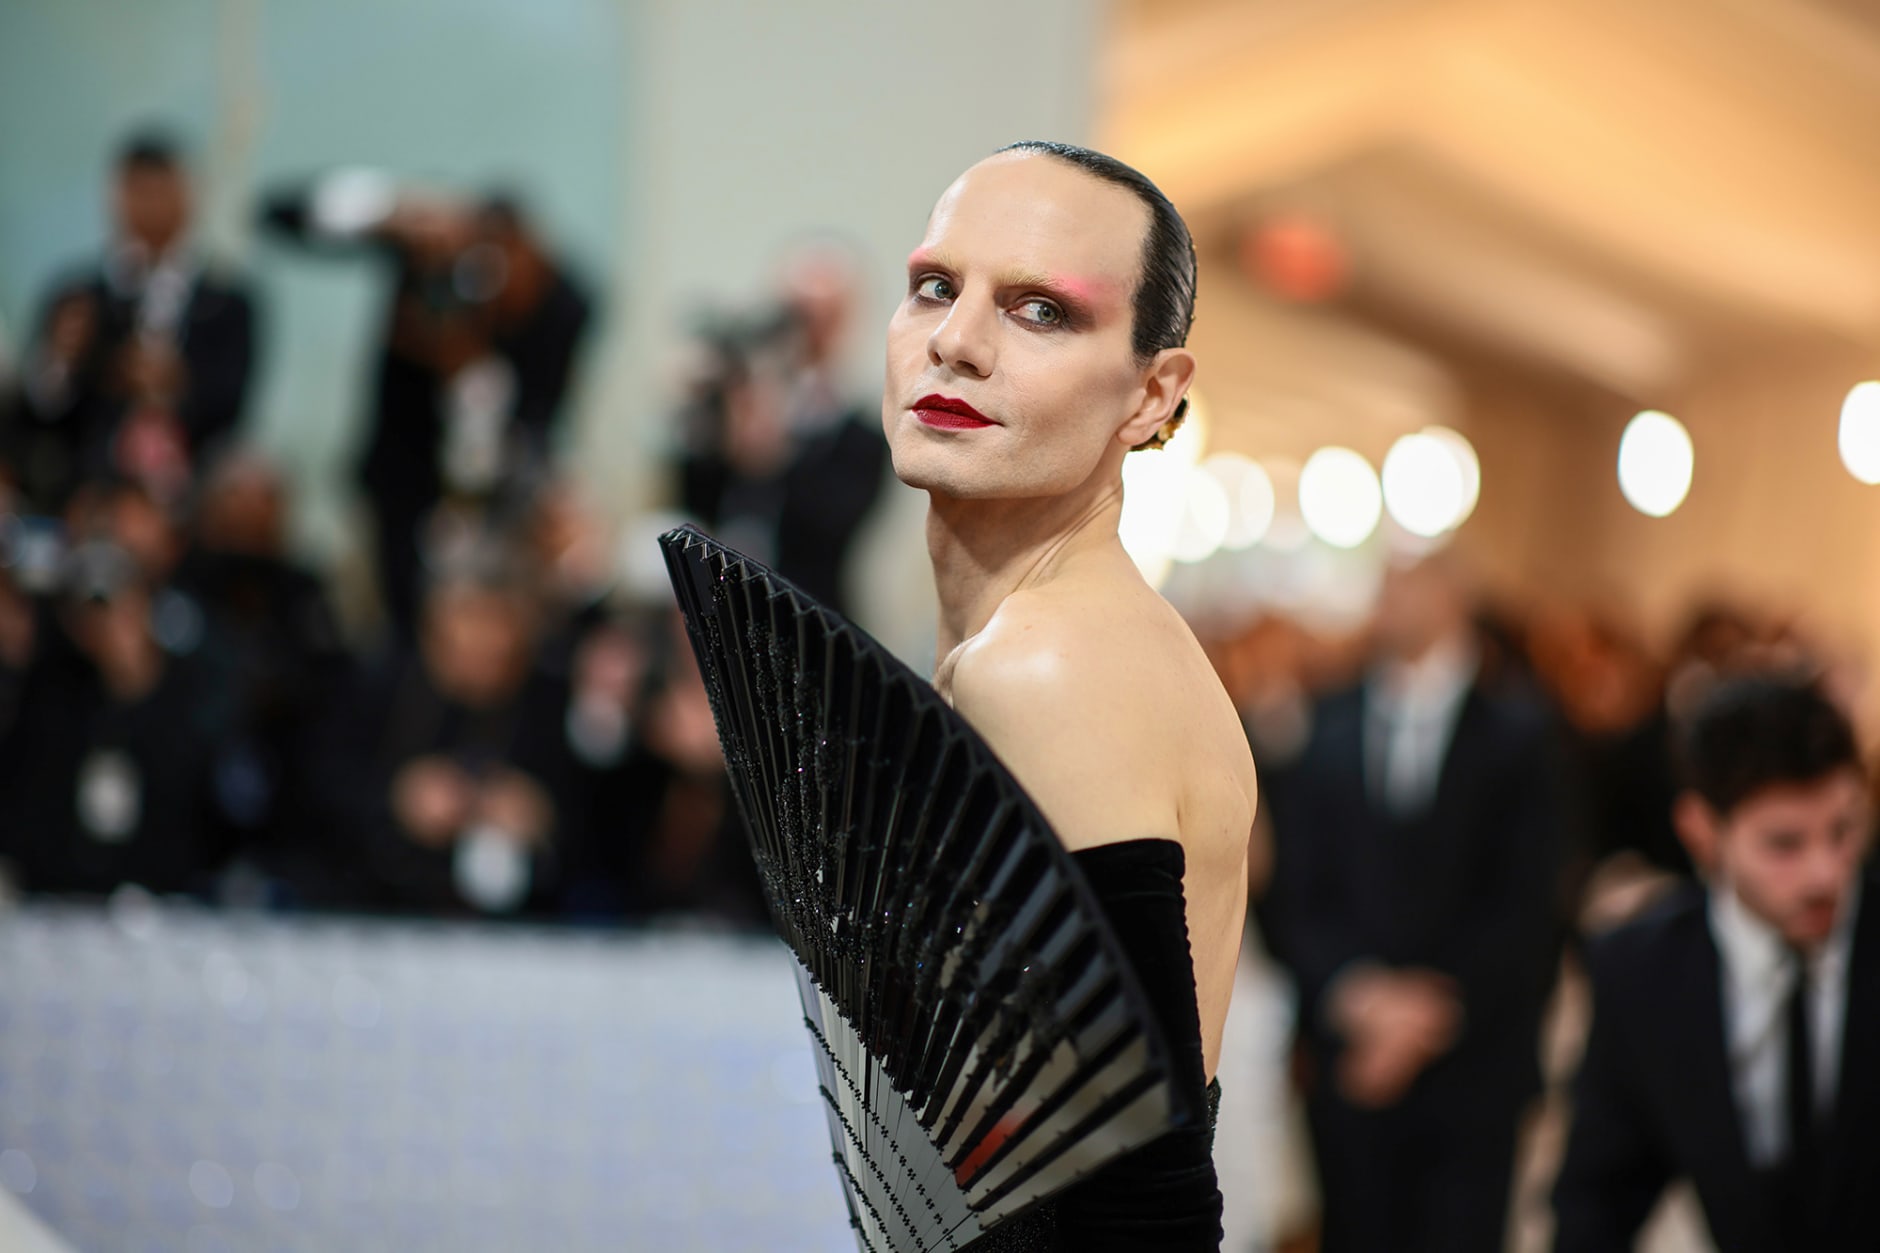 Broadway producer Jordan Roth paid homage to one of Lagerfeld's favorite accessories in this custom Schiaparelli look, with giant fan-shaped bodice.